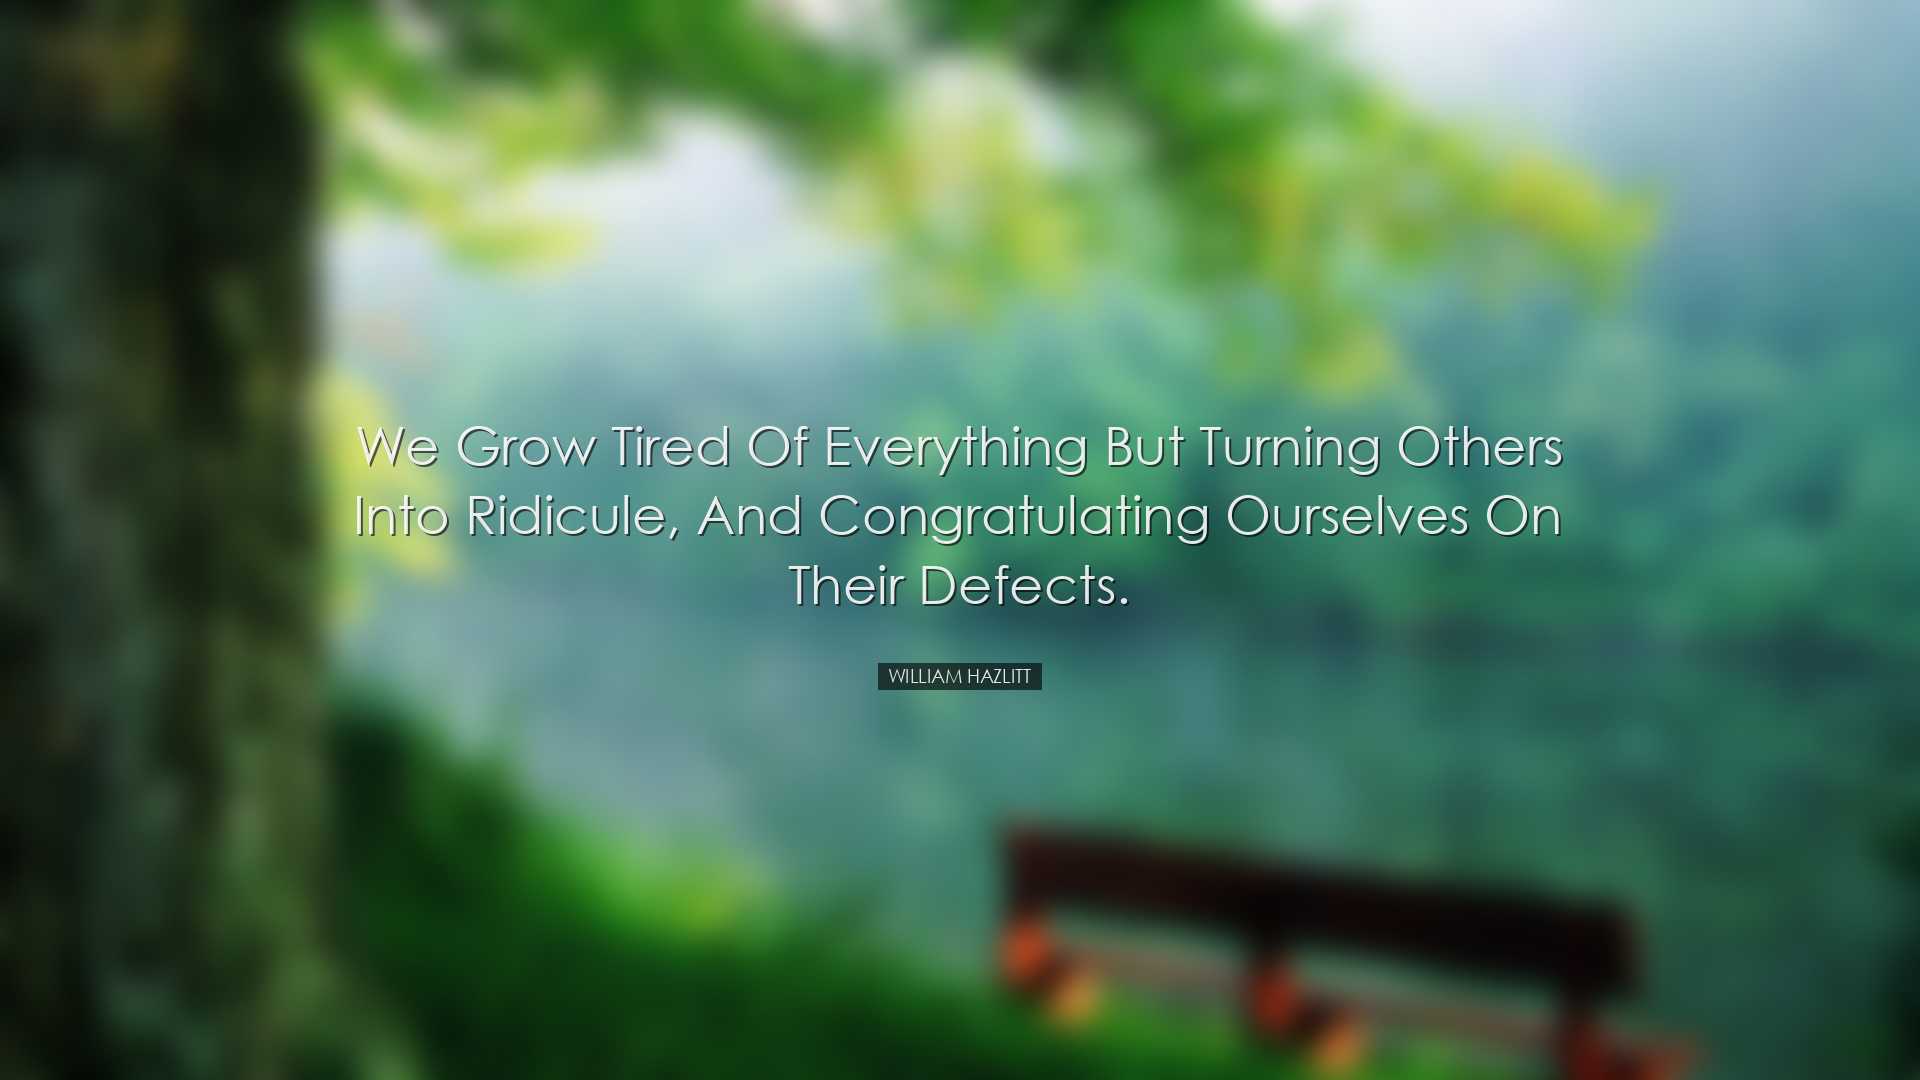 We grow tired of everything but turning others into ridicule, and